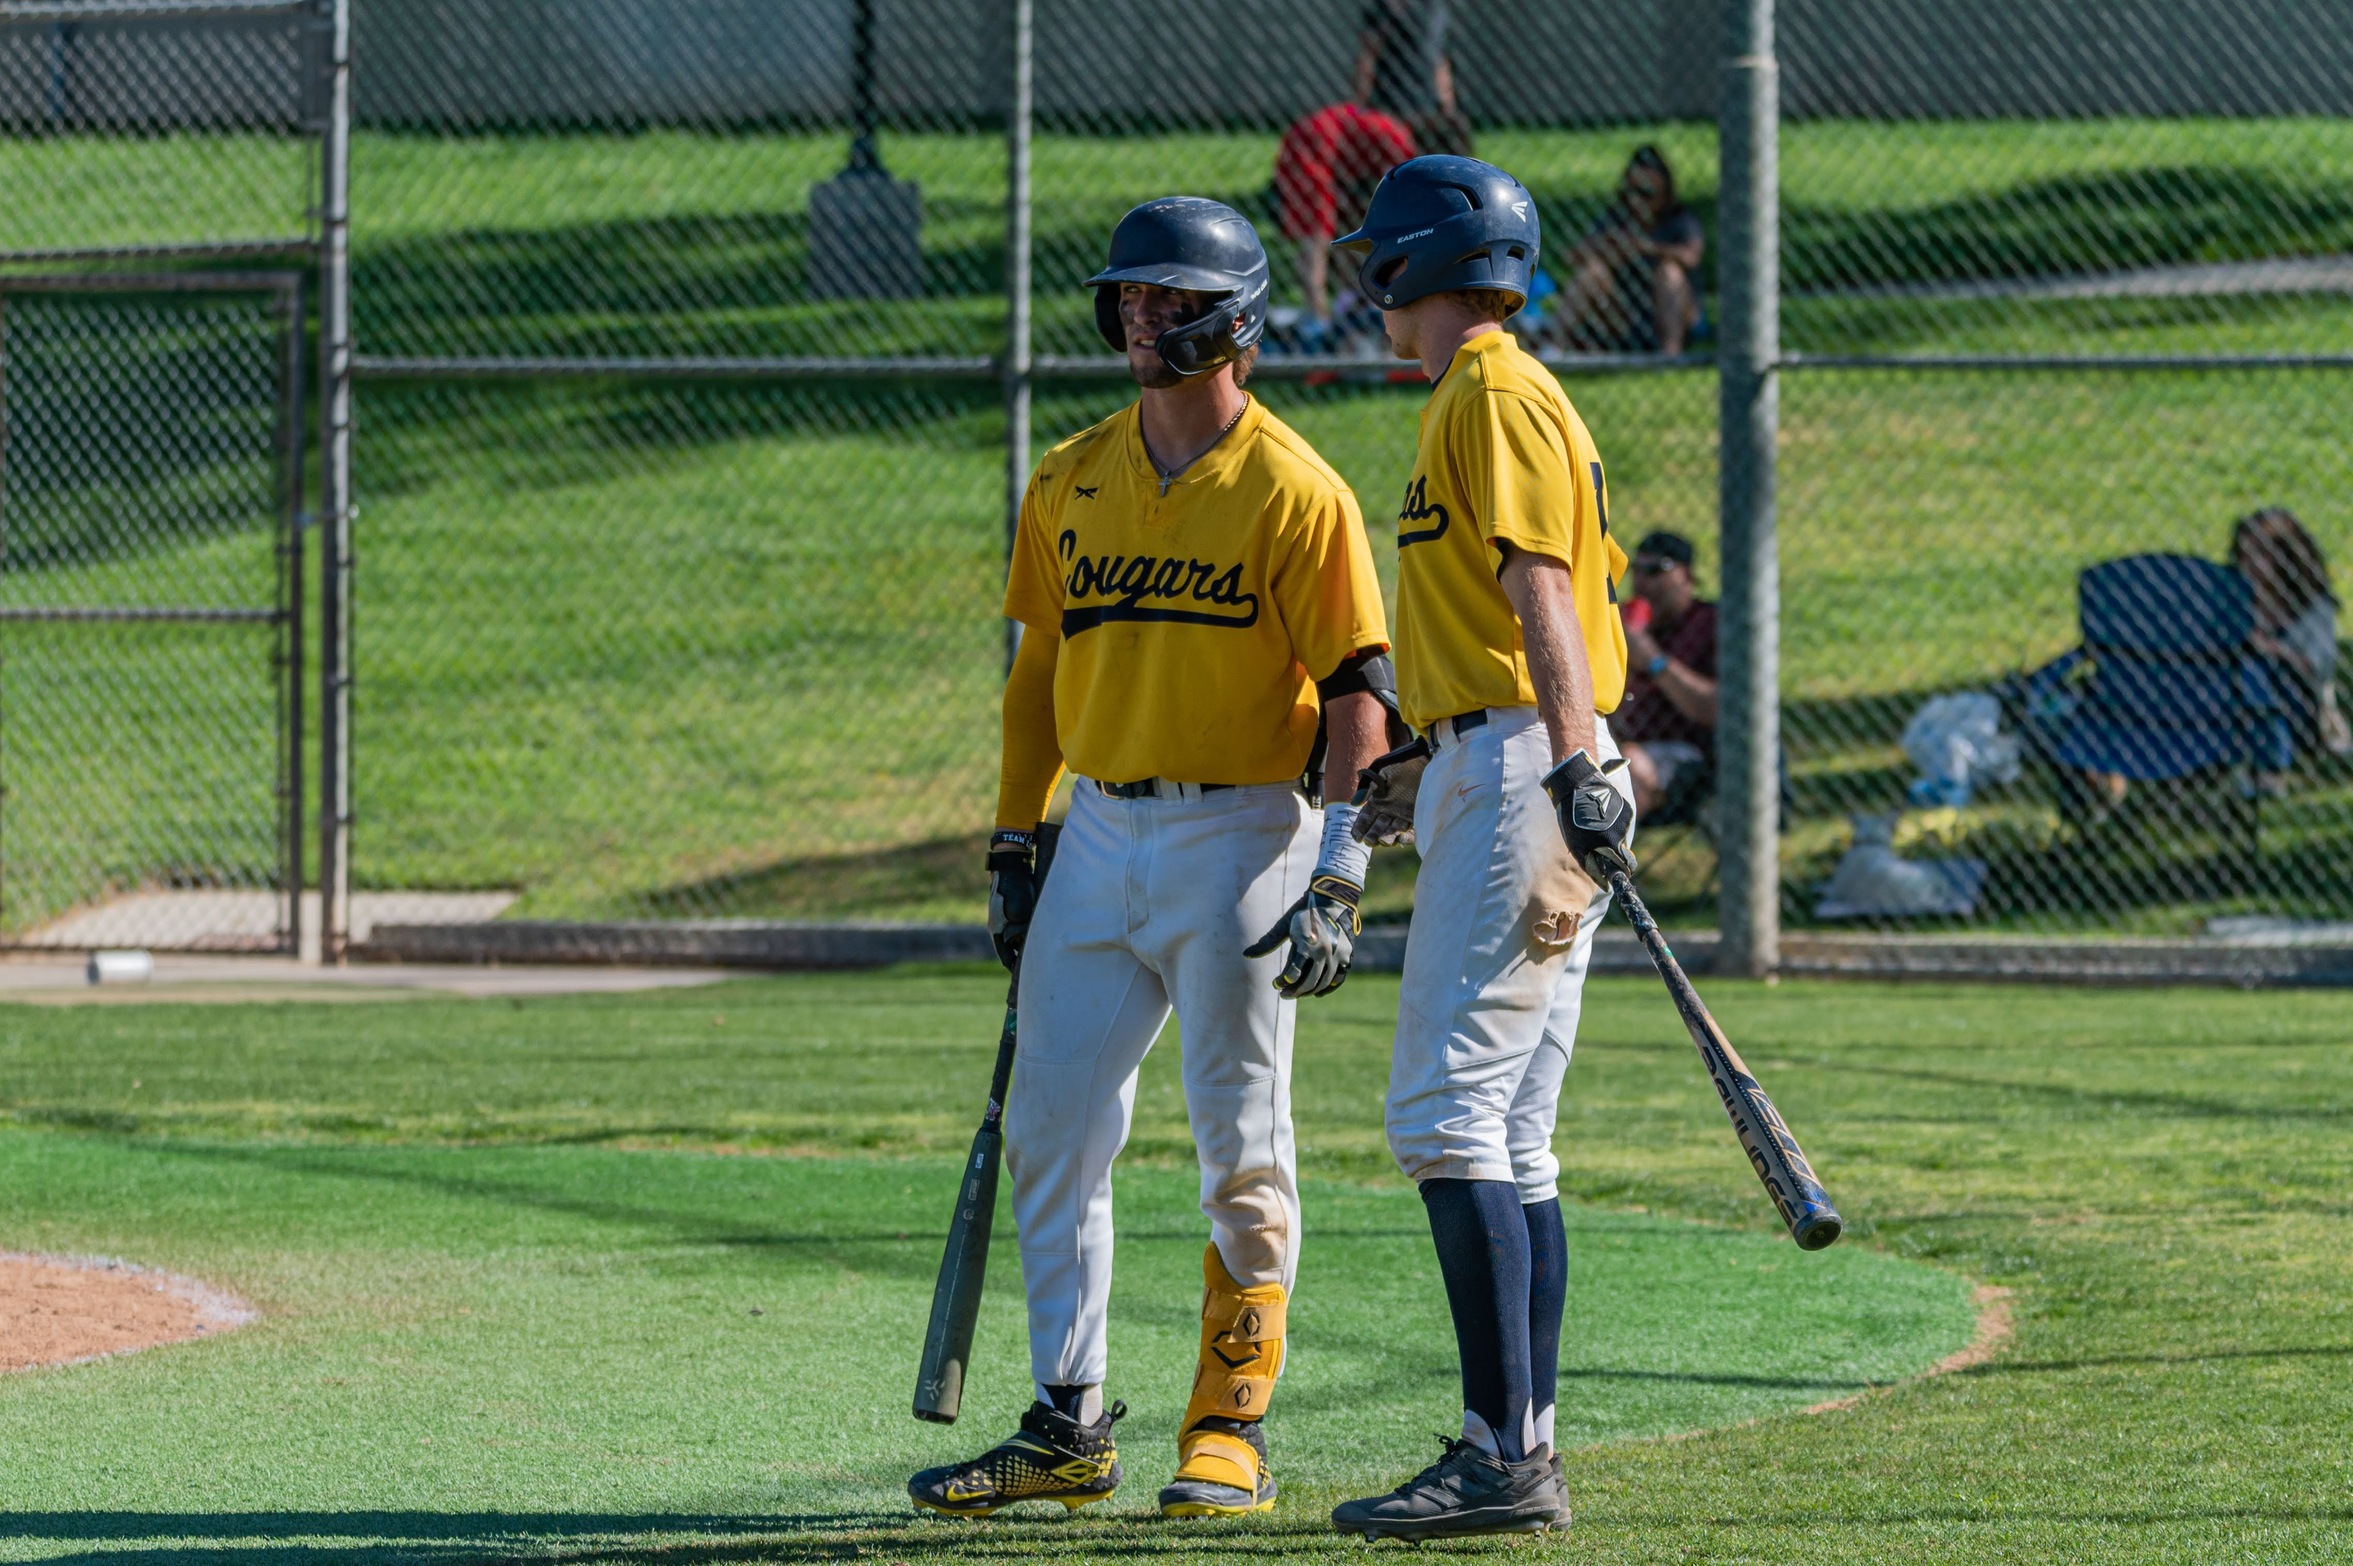 College of the Canyons vs. Antelope Valley College on March 26, 2022.